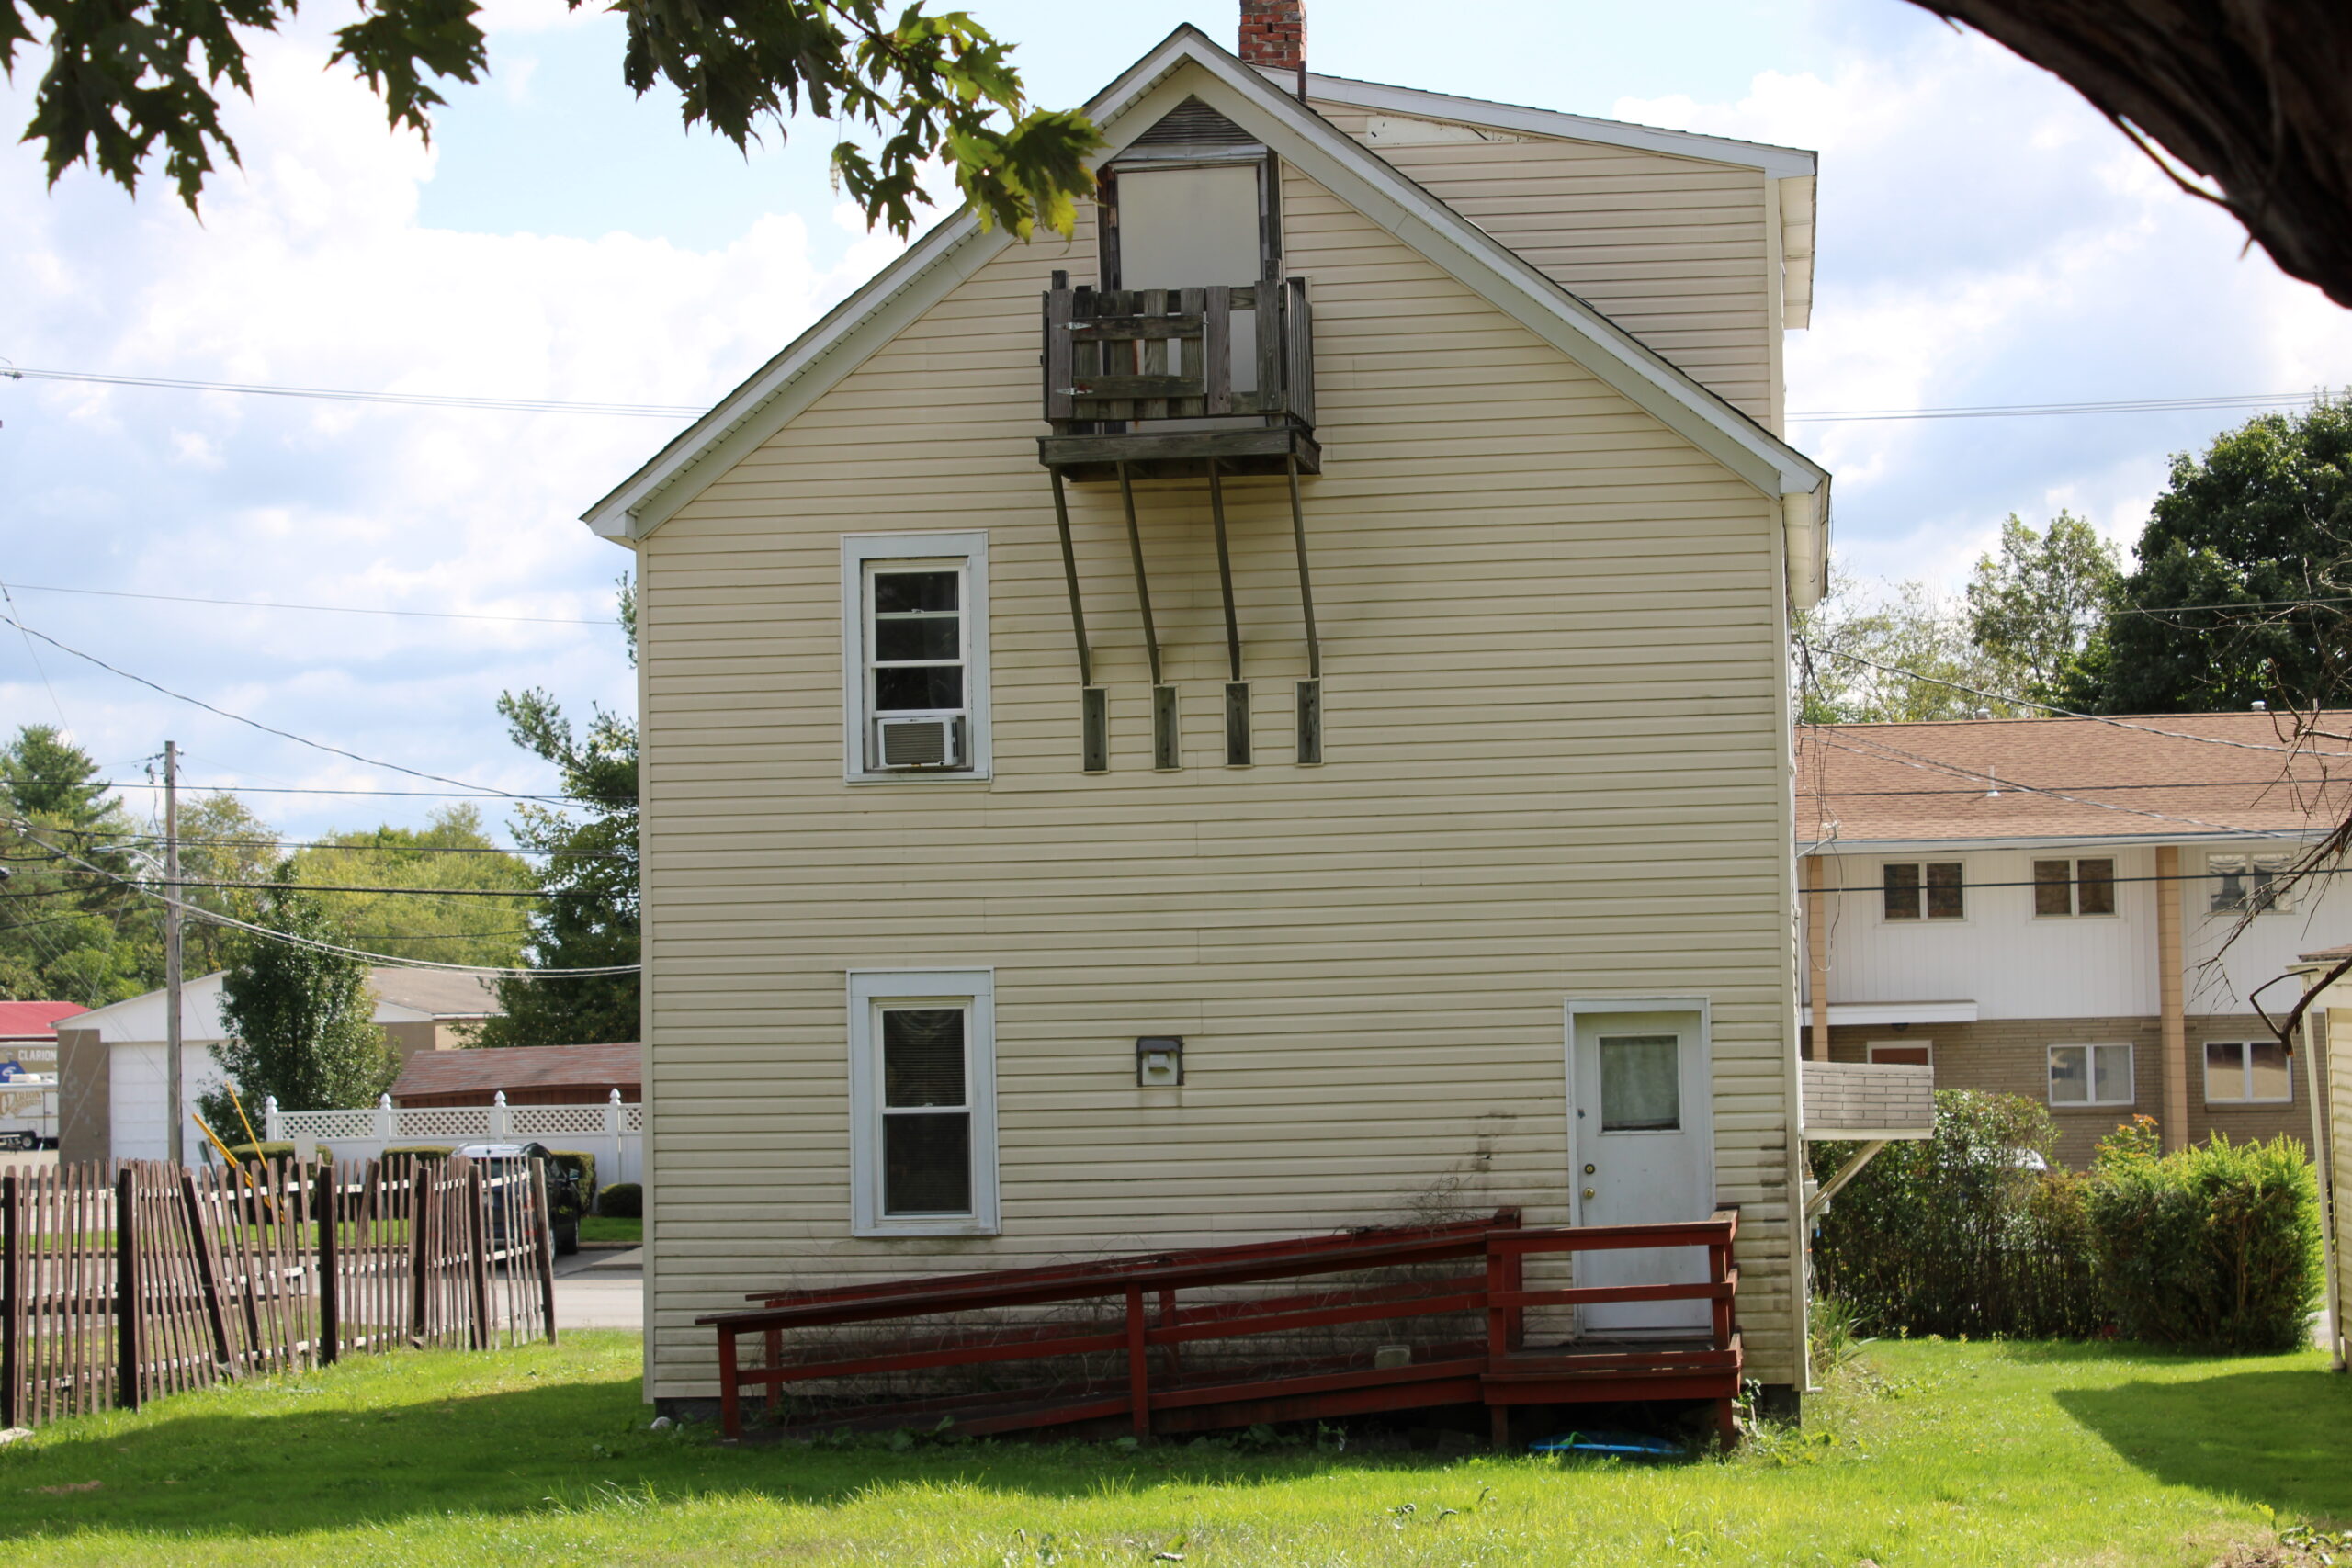 Two Bedroom Upstairs Apartment at 108 Grand Ave, Clarion, PA